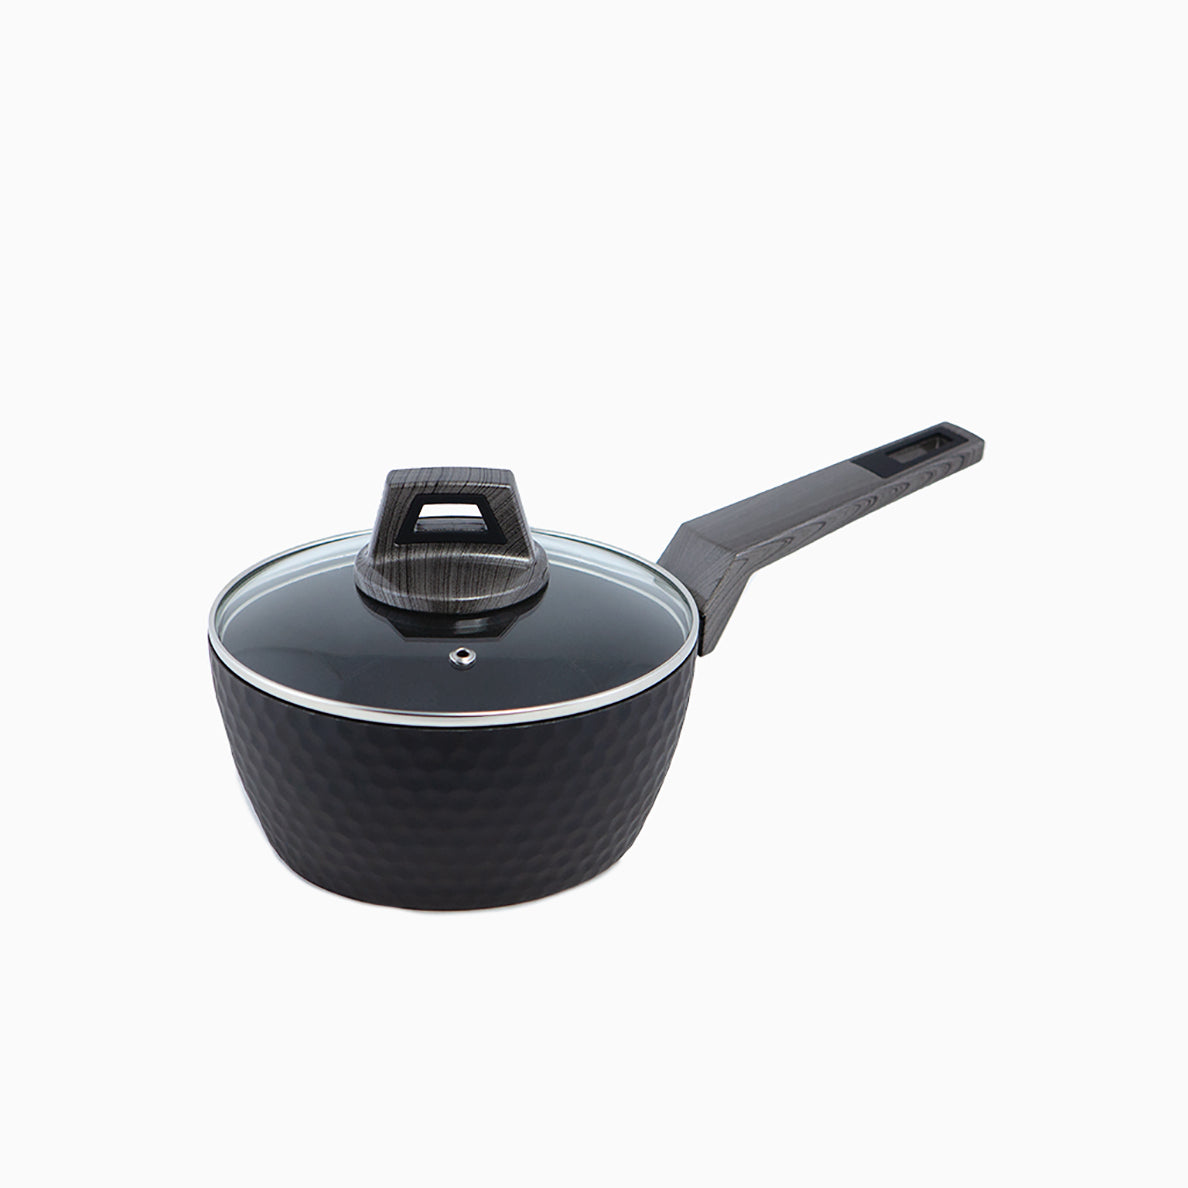 Black Ice saucepan with diamond finish lid. For all types of